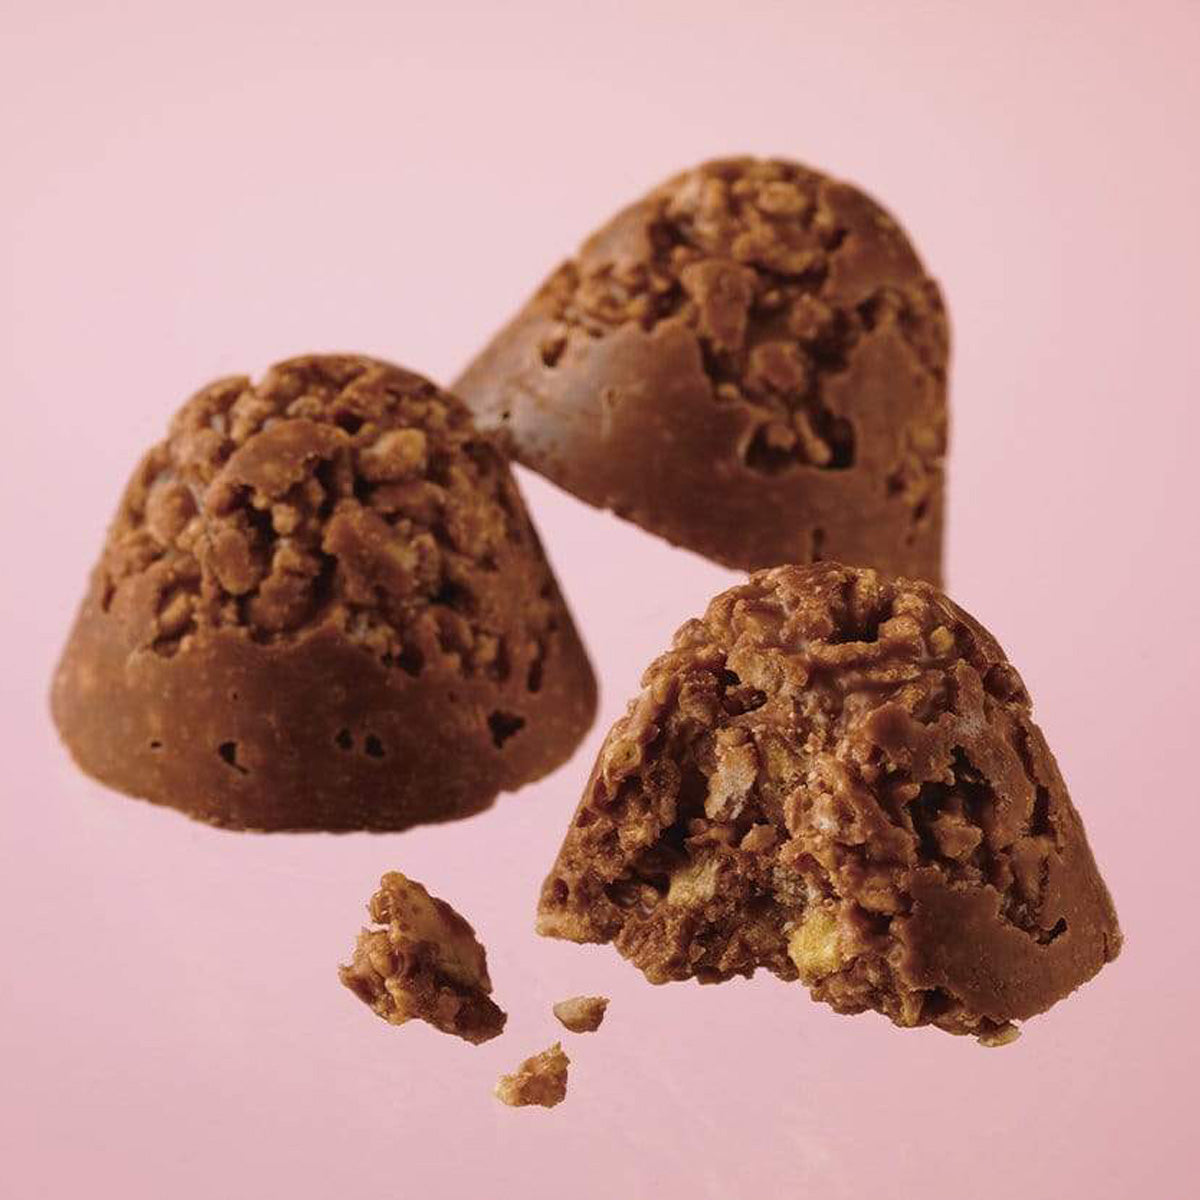 ROYCE' Chocolate - Potechi Crunch Chocolate - Image shows brown chocolate creations filled with crumbled potato chips, cornflakes, and cookie bits inside. Background is in pink color.